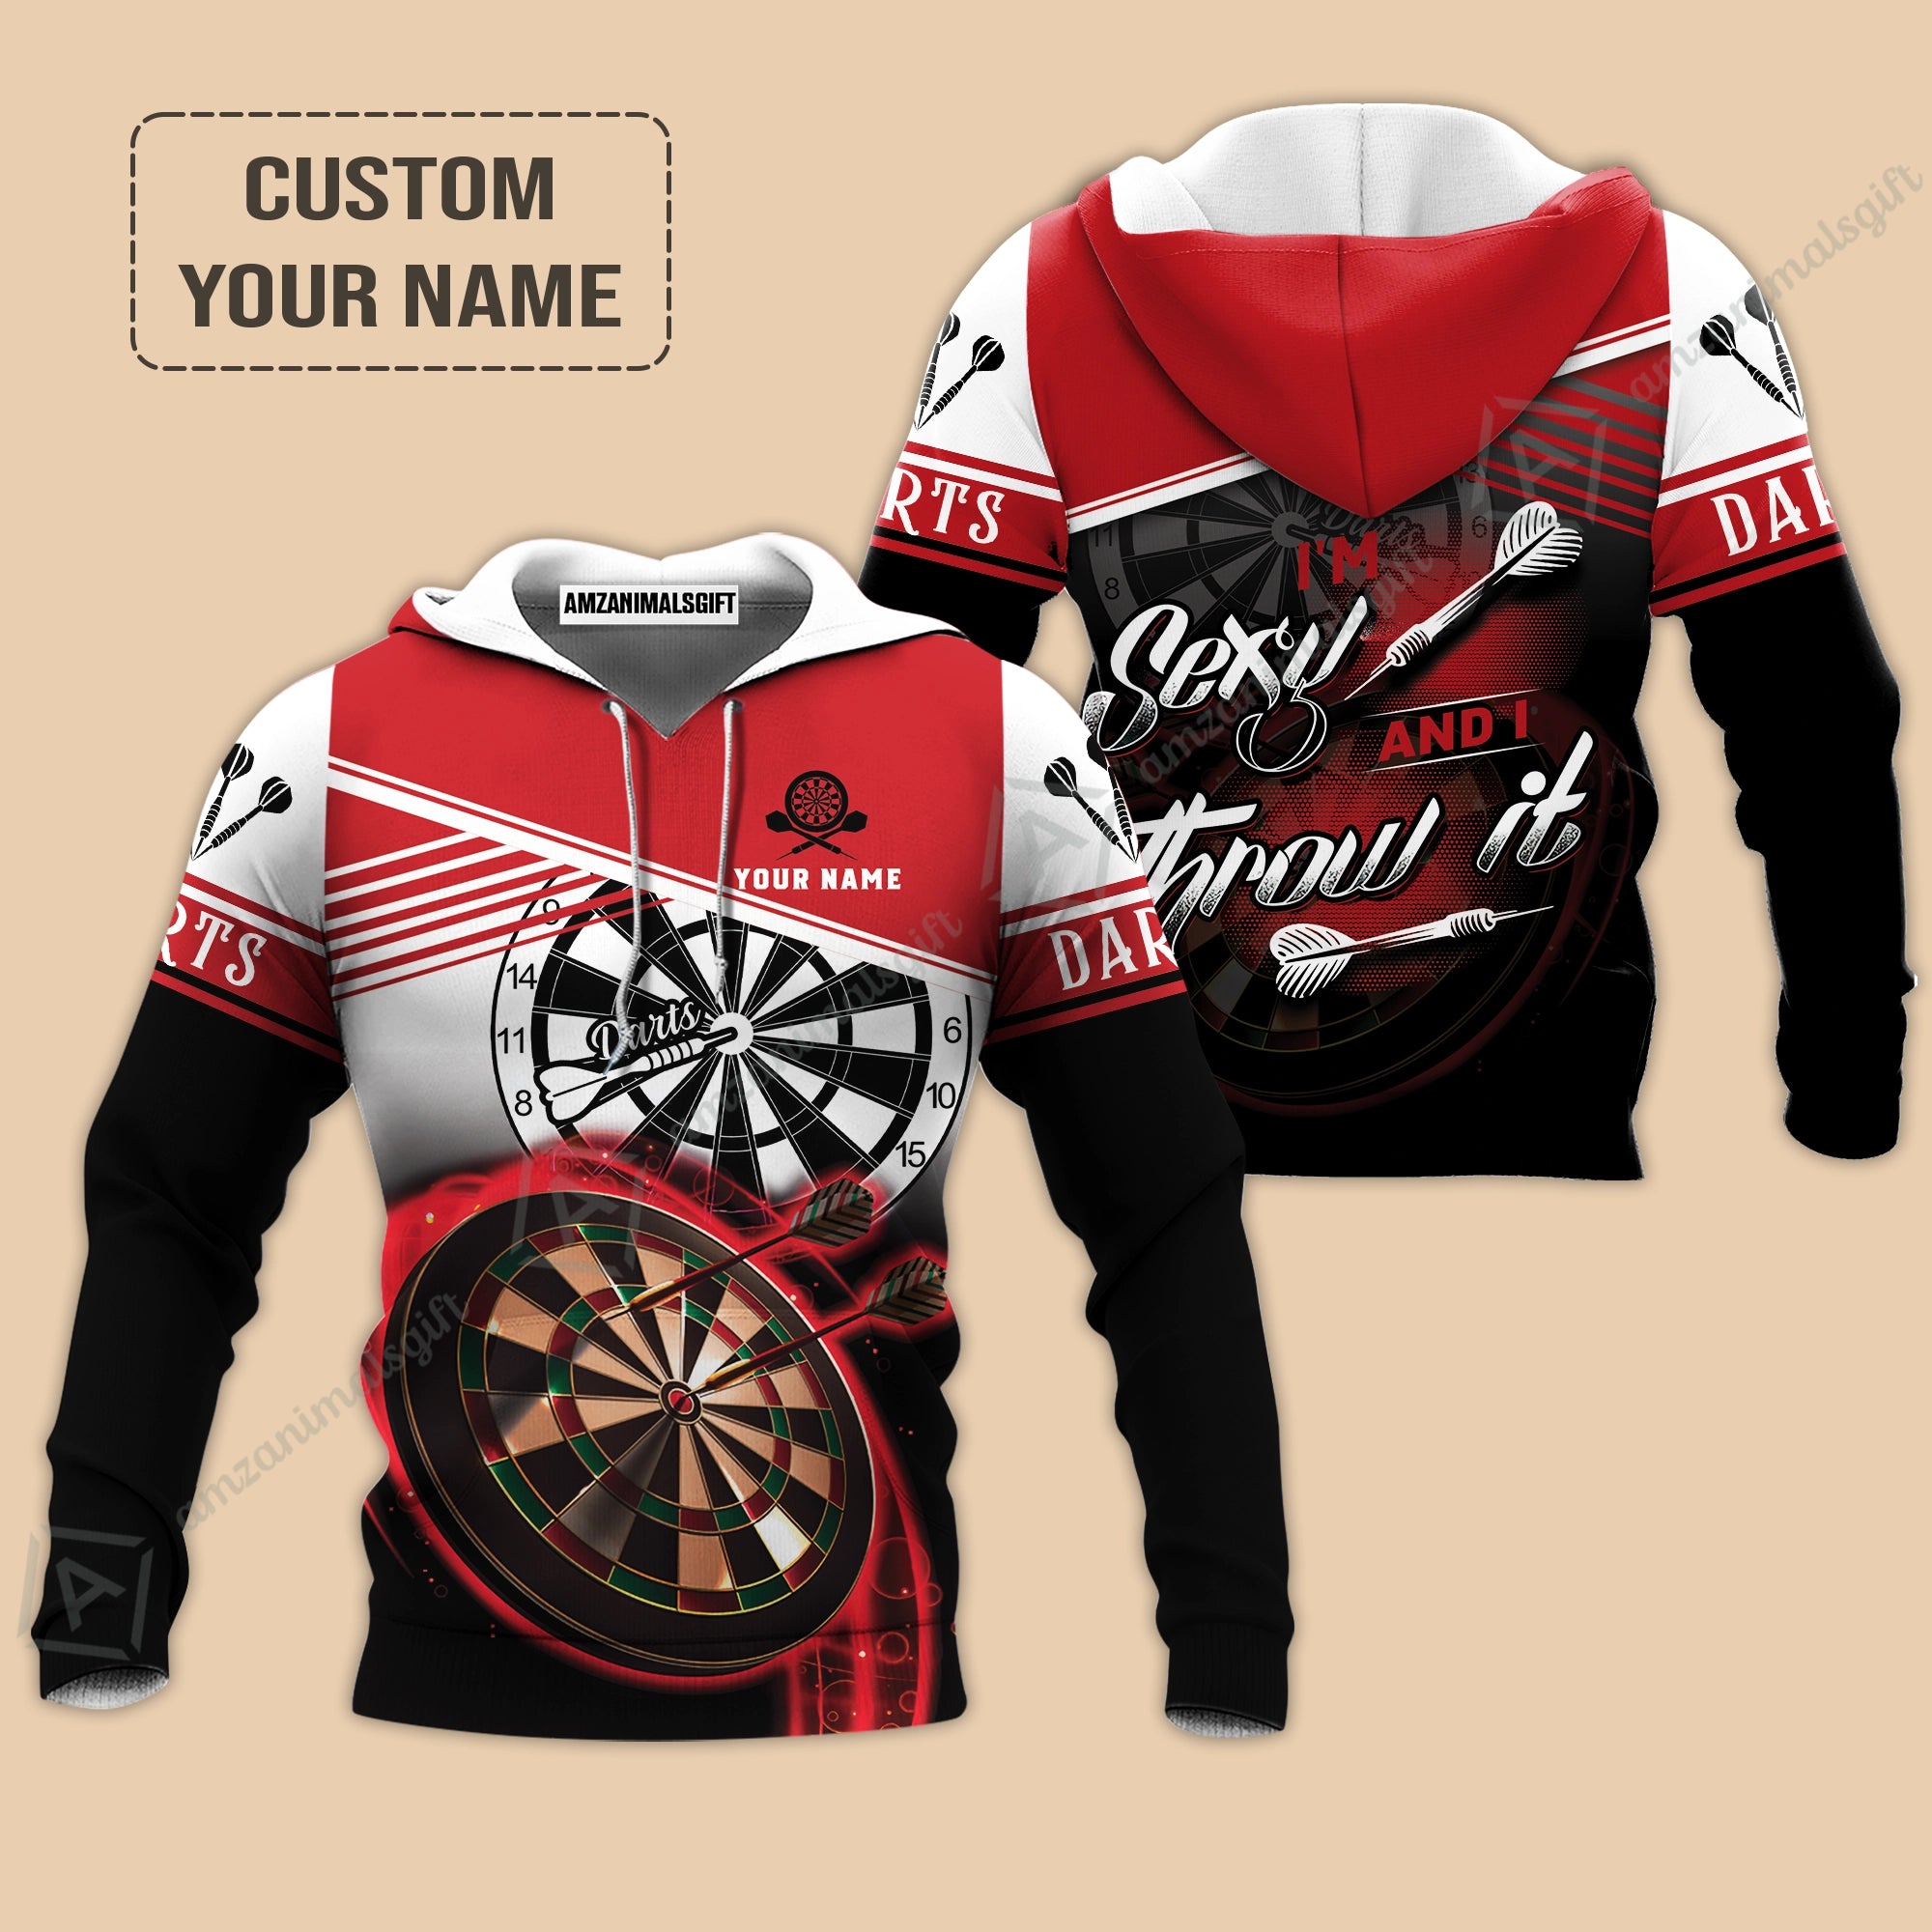 Personalized Darts Hoodie, Darts Red Color Customized Hoodie I'm Sexy And I Throw It, Outfits For Darts Players, Darts Team